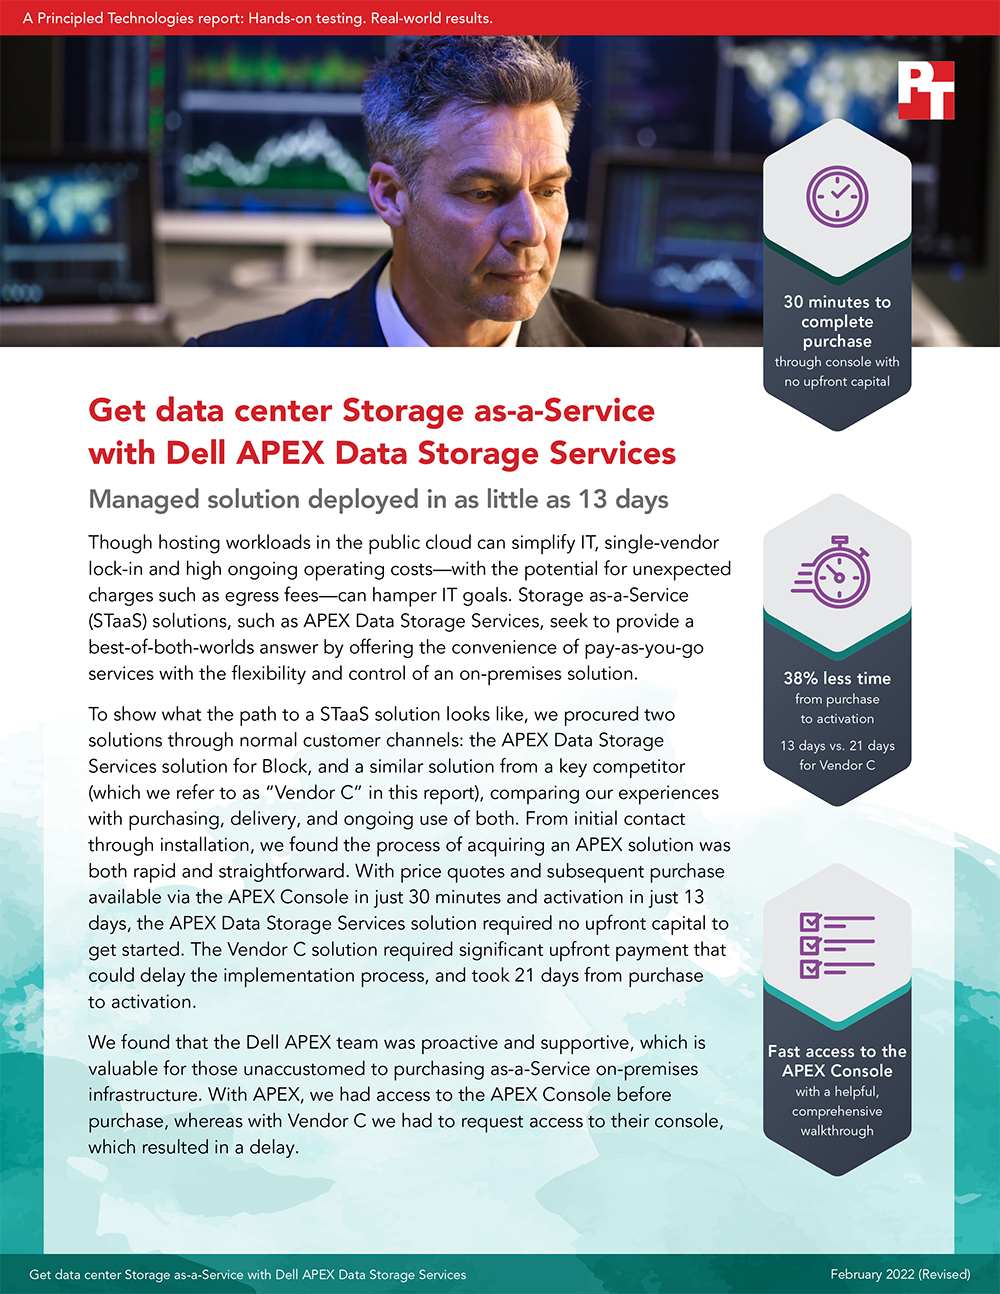 Get data center Storage as-a-Service with Dell APEX Data Storage Services